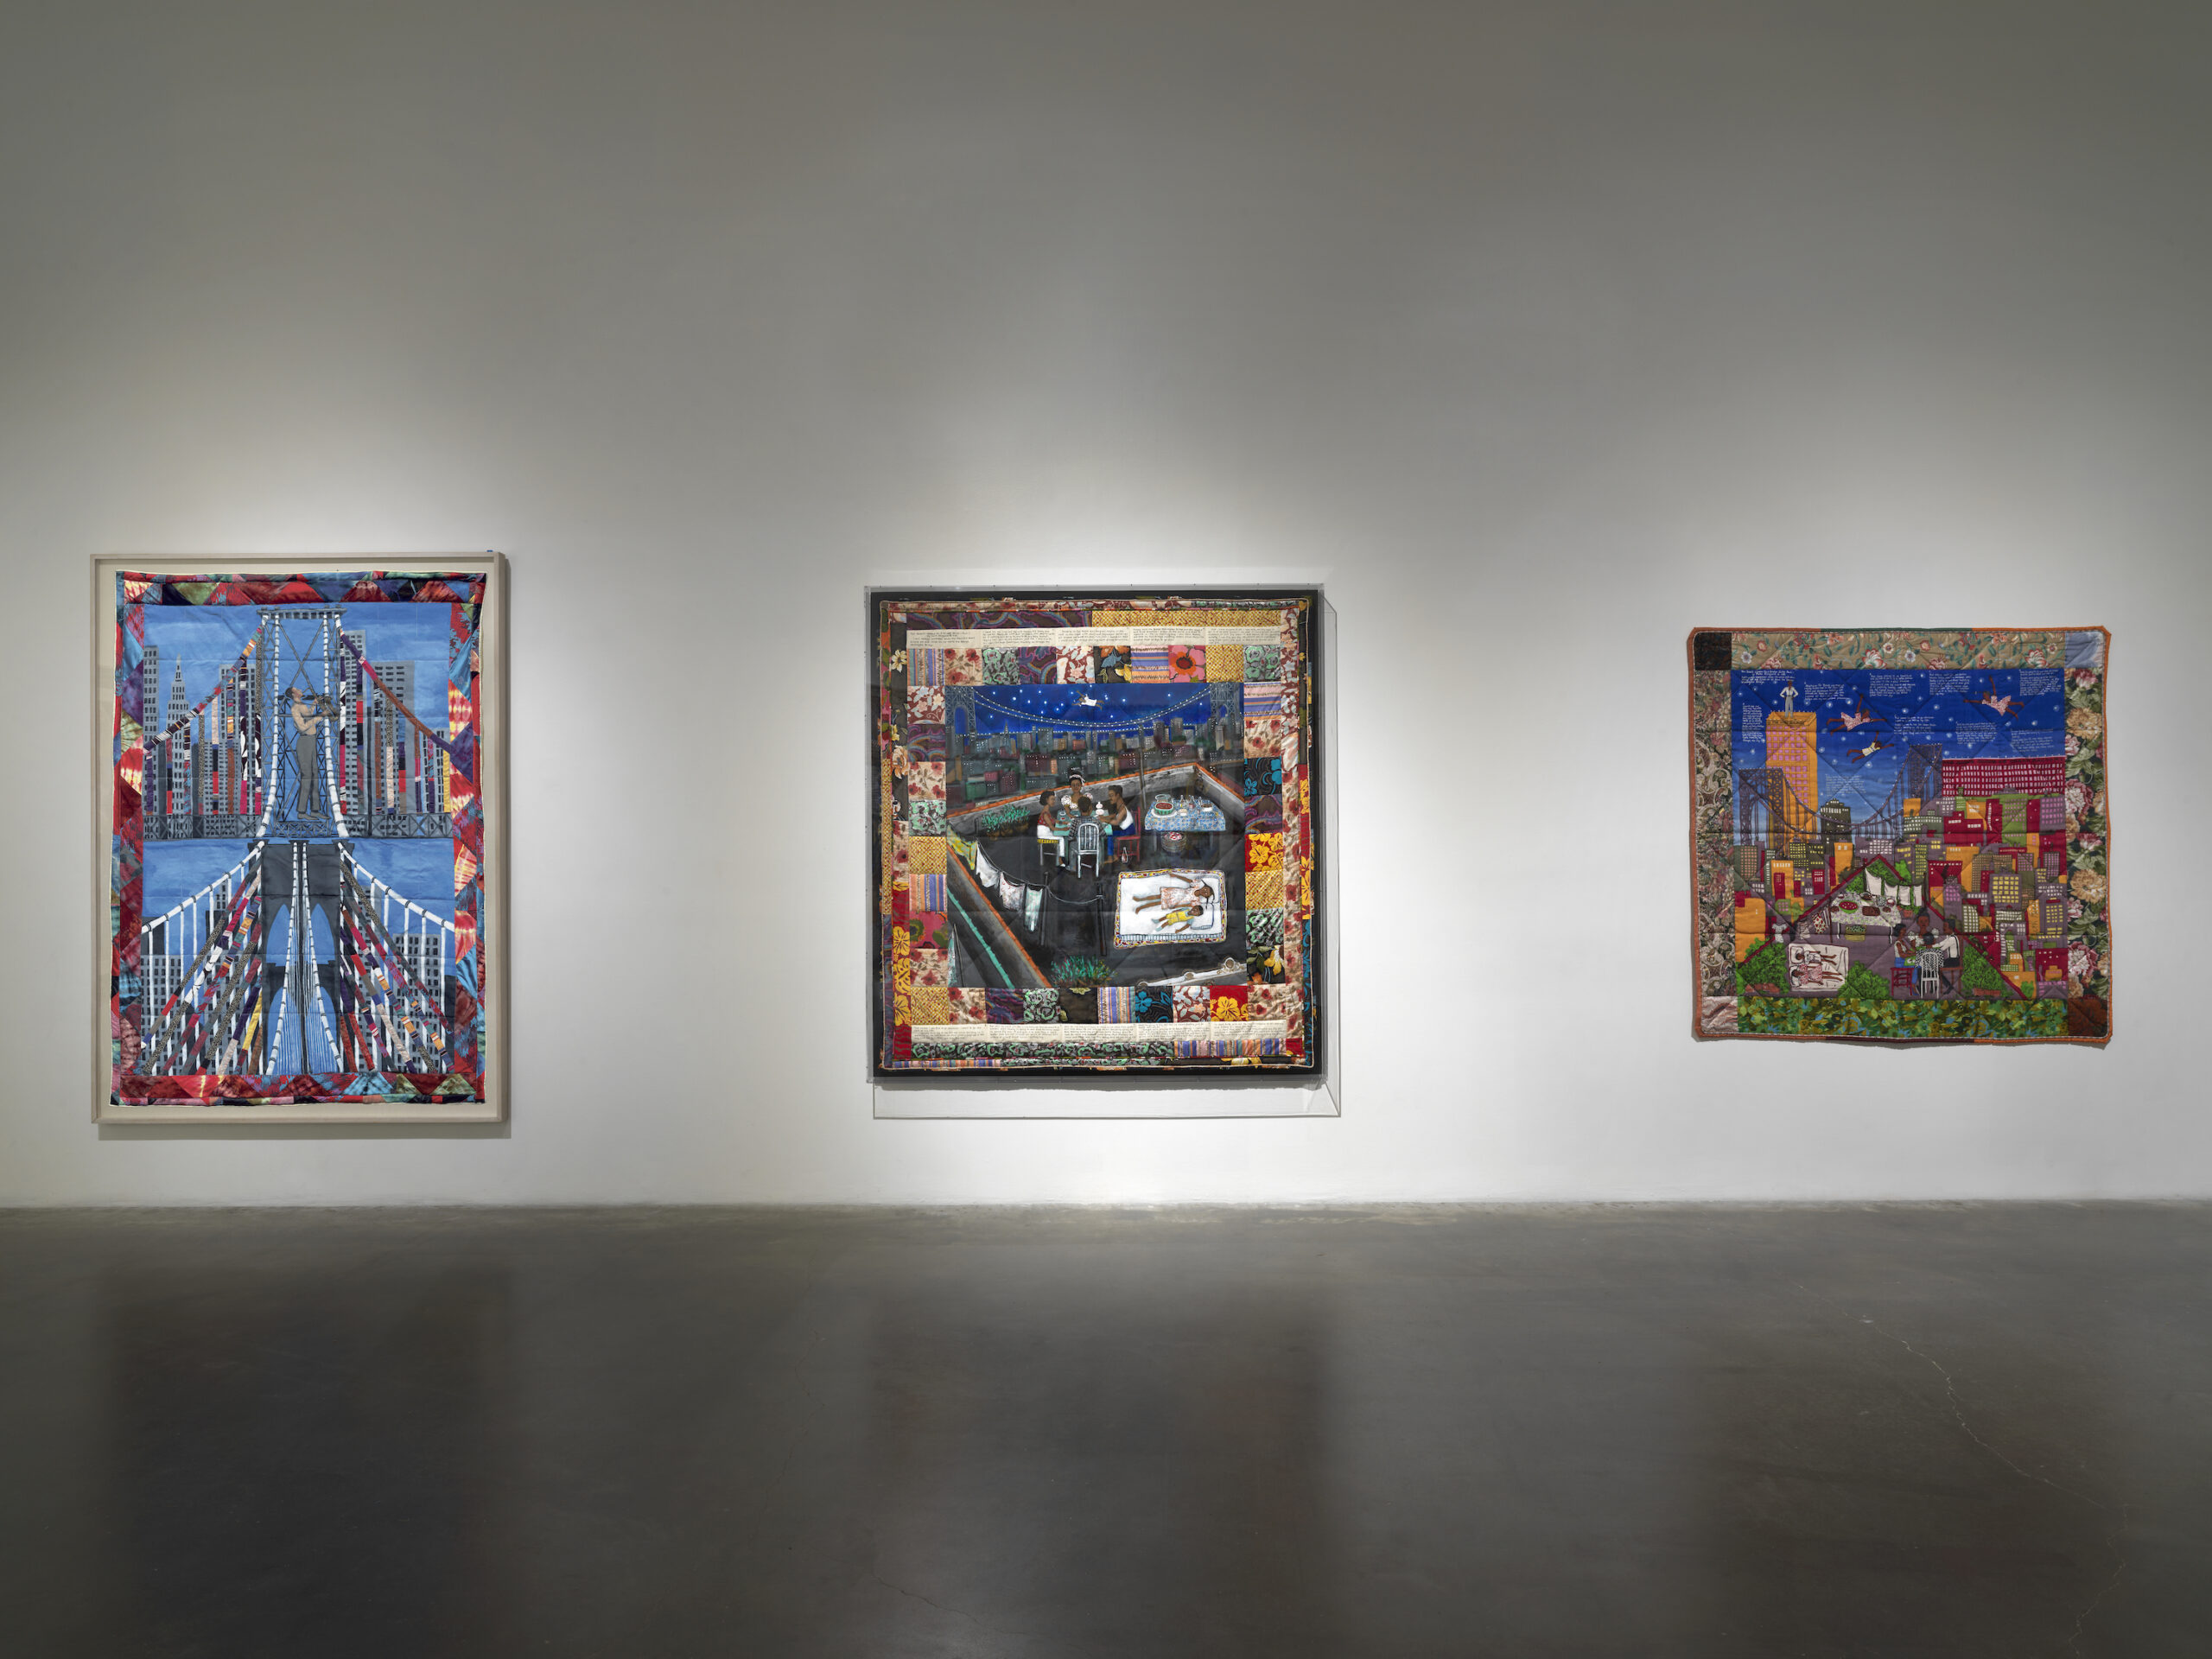 A photo of 3 Faith Ringgold story quilts installed at the New Museum, New York